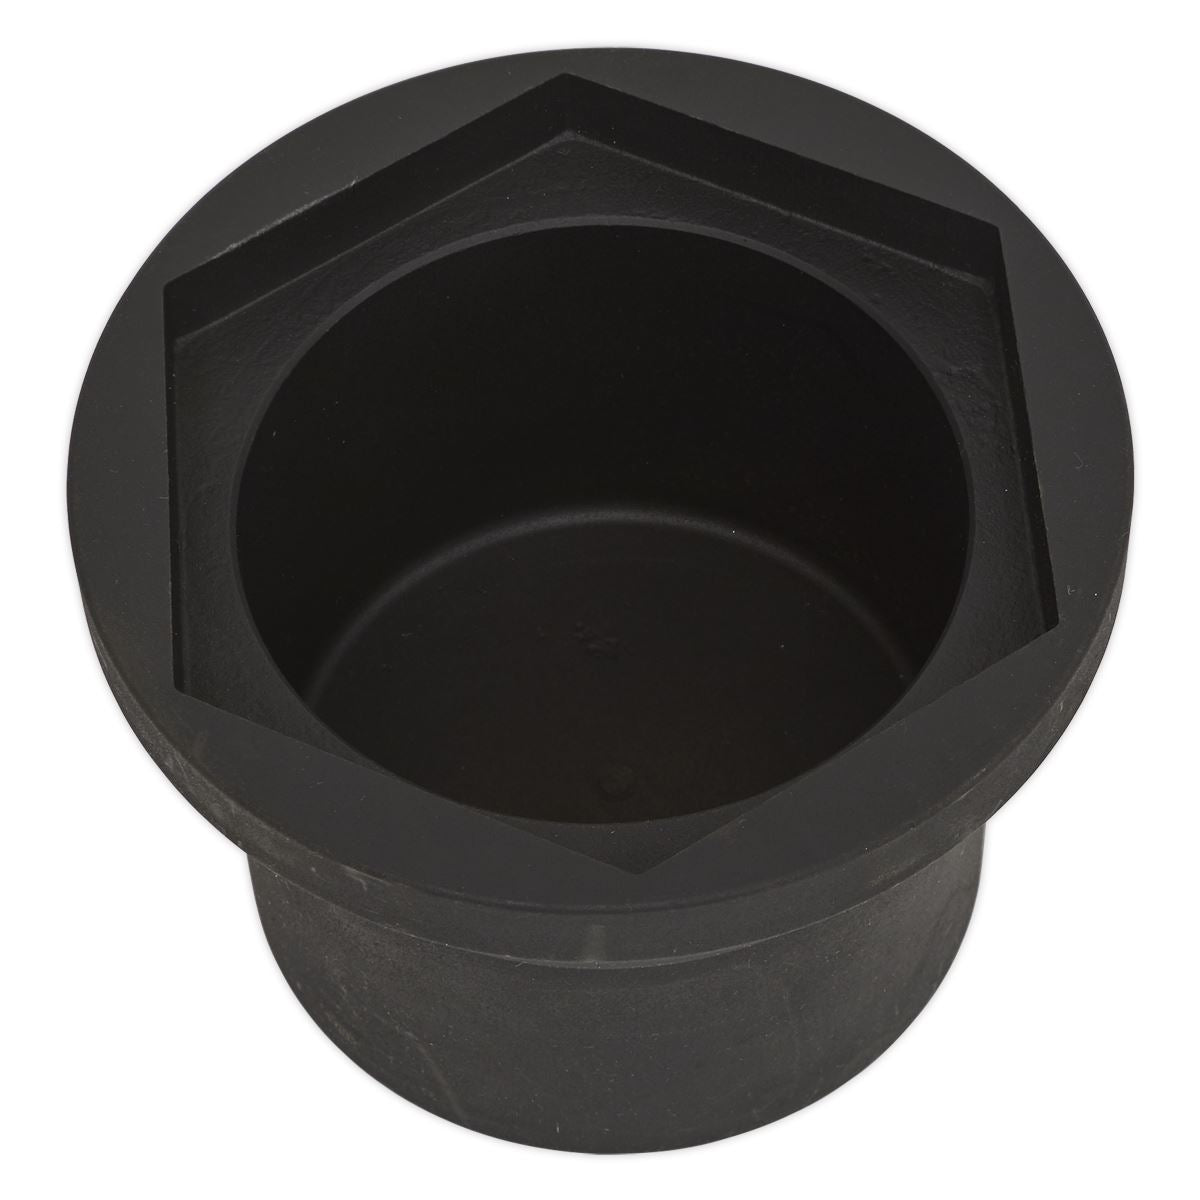 Sealey Axle Nut Socket - Iveco 98mm 36mm Hex Drive